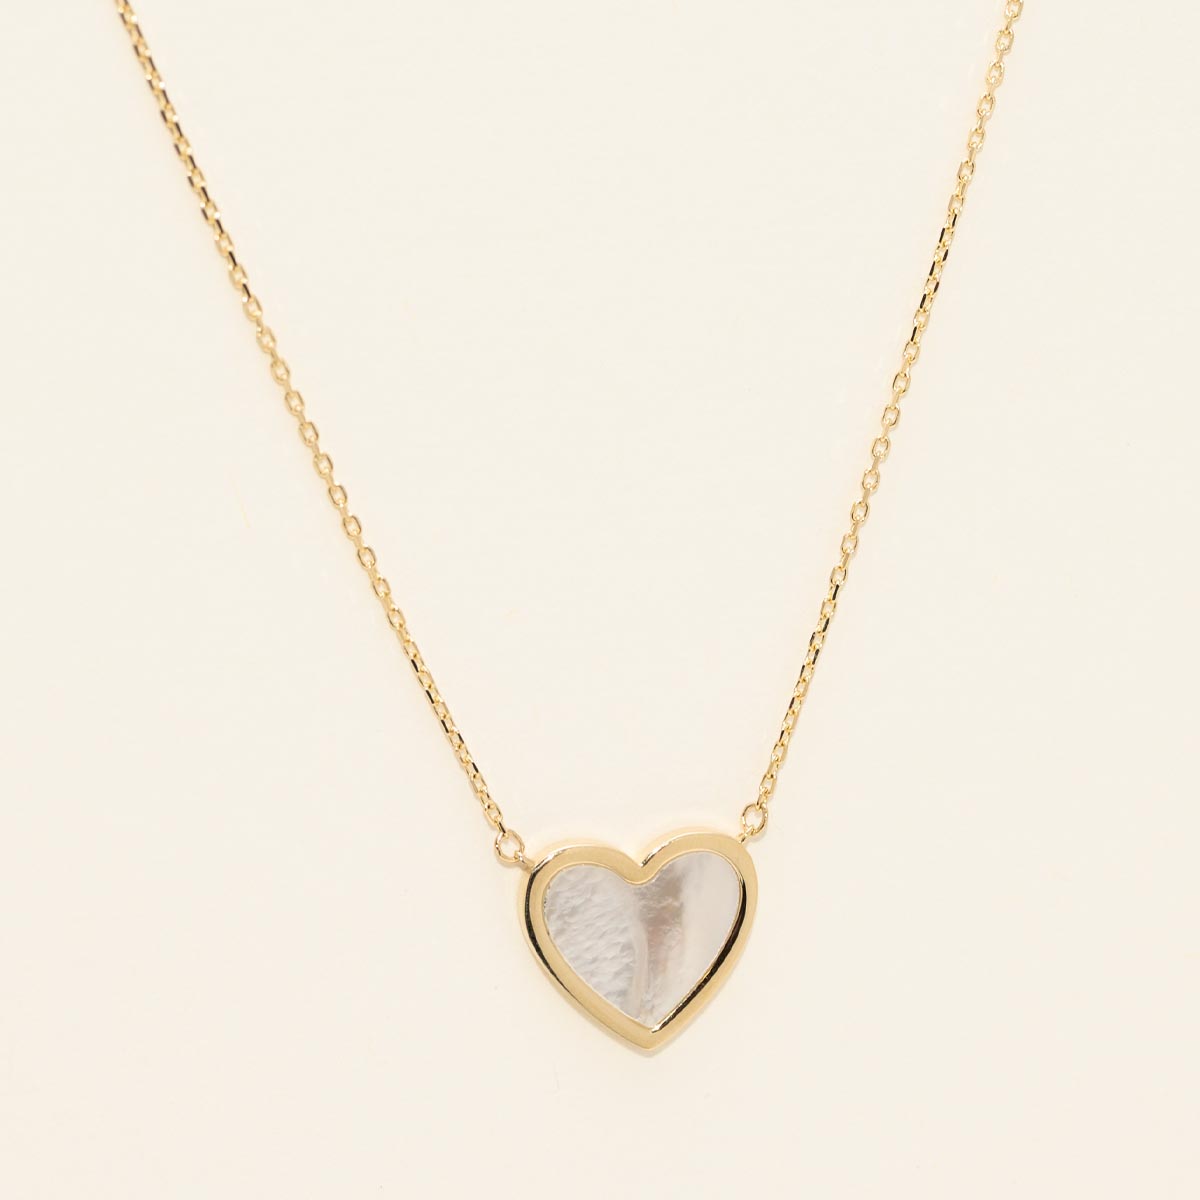 Heart Shape Mother of Pearl Bezel Necklace in 14kt Yellow Gold